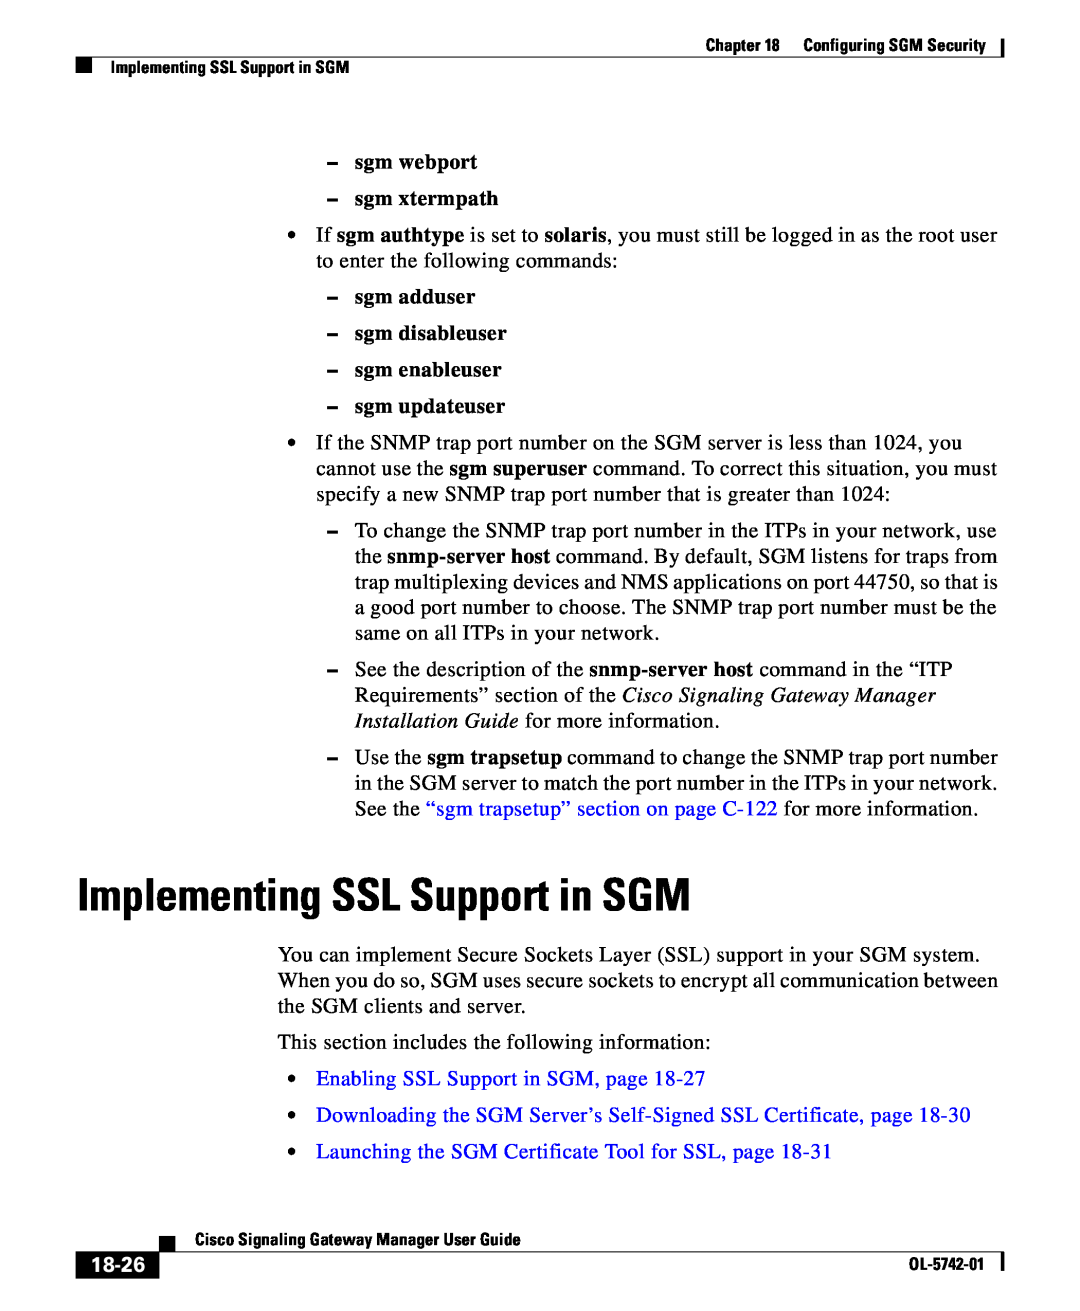 Cisco Systems OL-5742-01 Implementing SSL Support in SGM, sgm webport -sgm xtermpath, Enabling SSL Support in SGM, page 